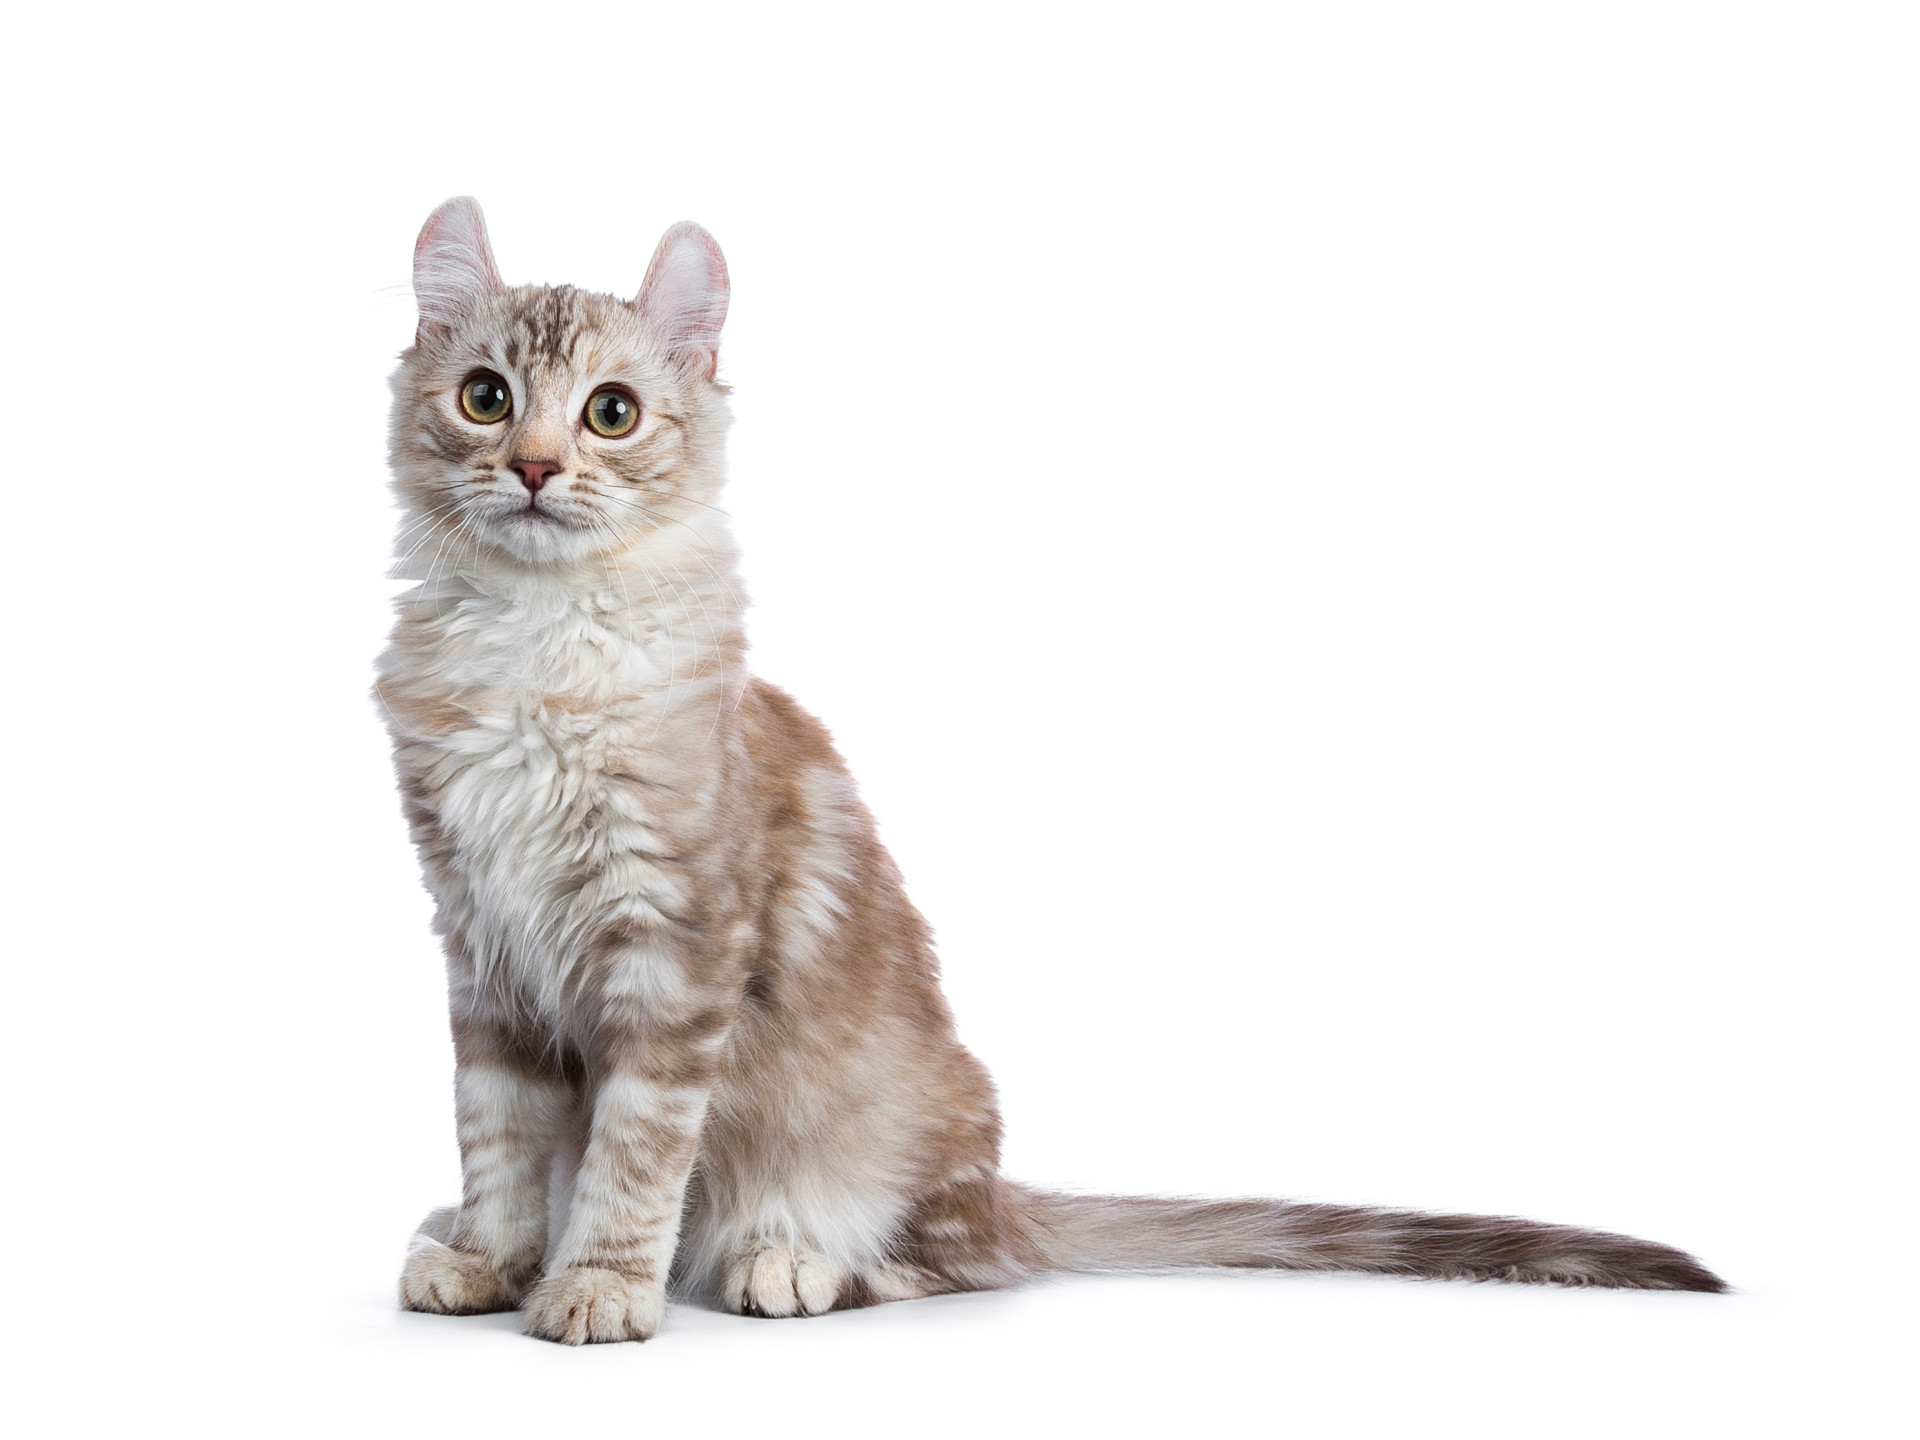 The world's most expensive cat breeds